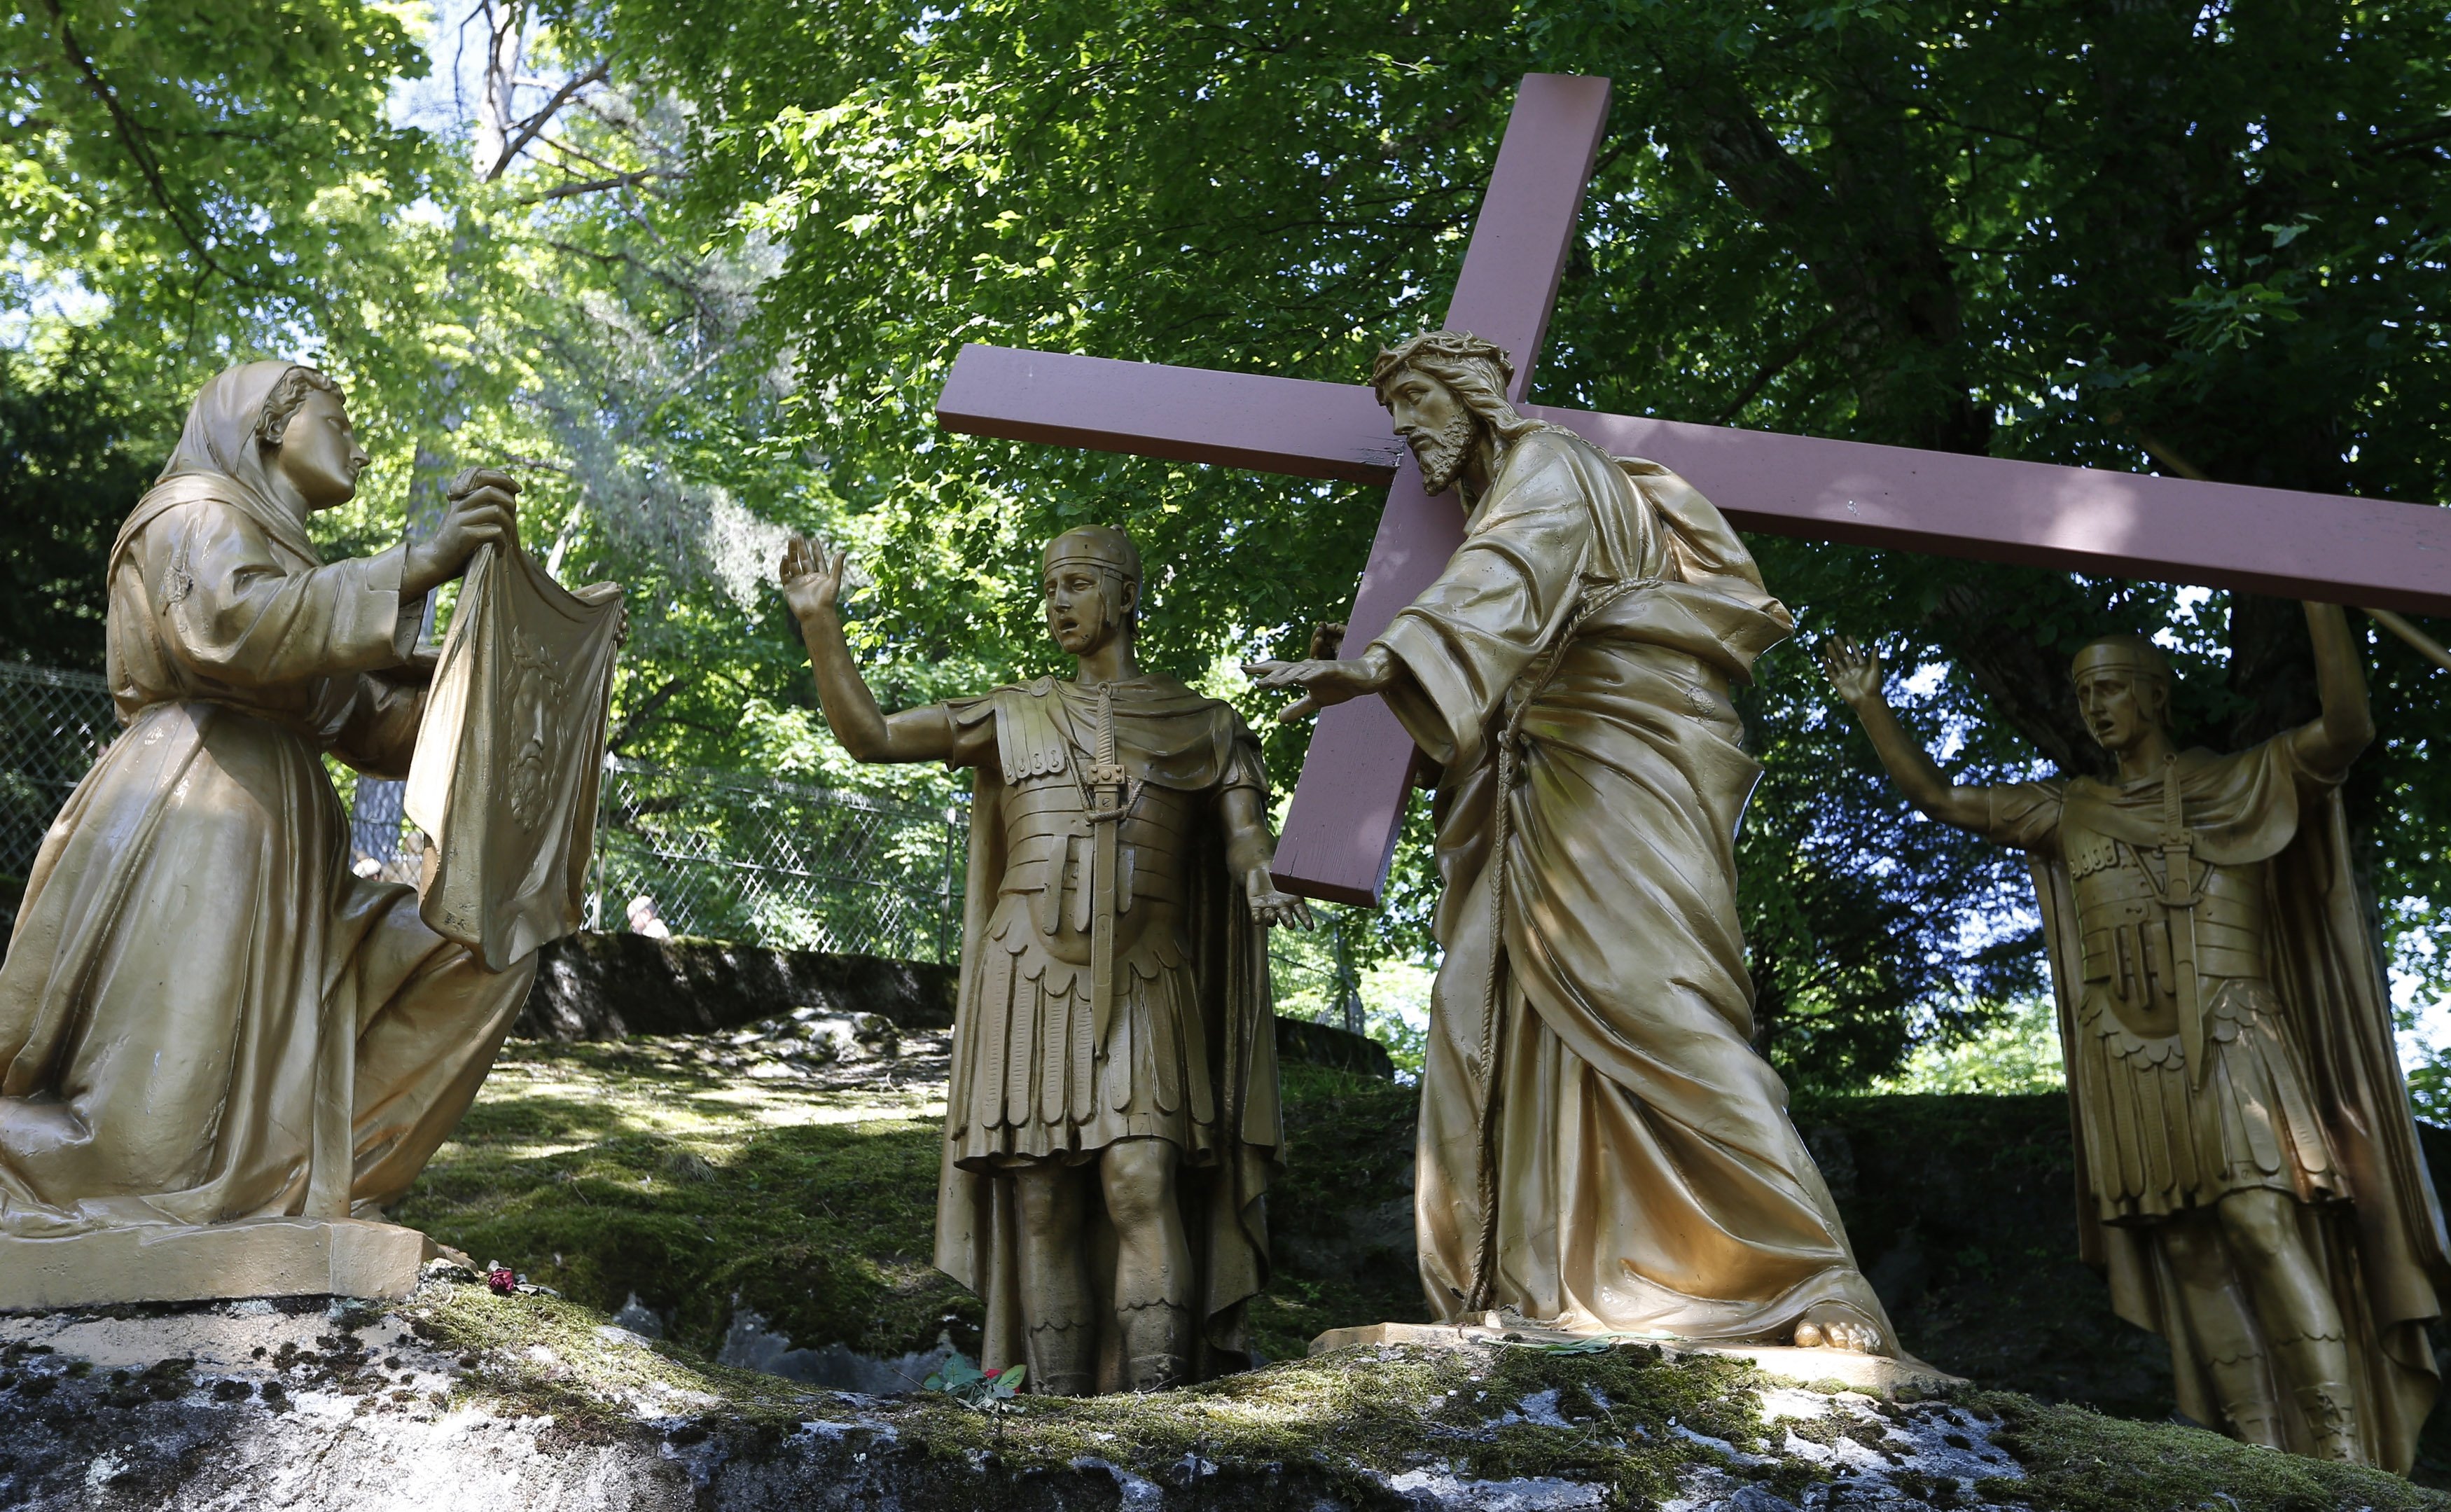 Stations of the Cross - My Catholic Life!